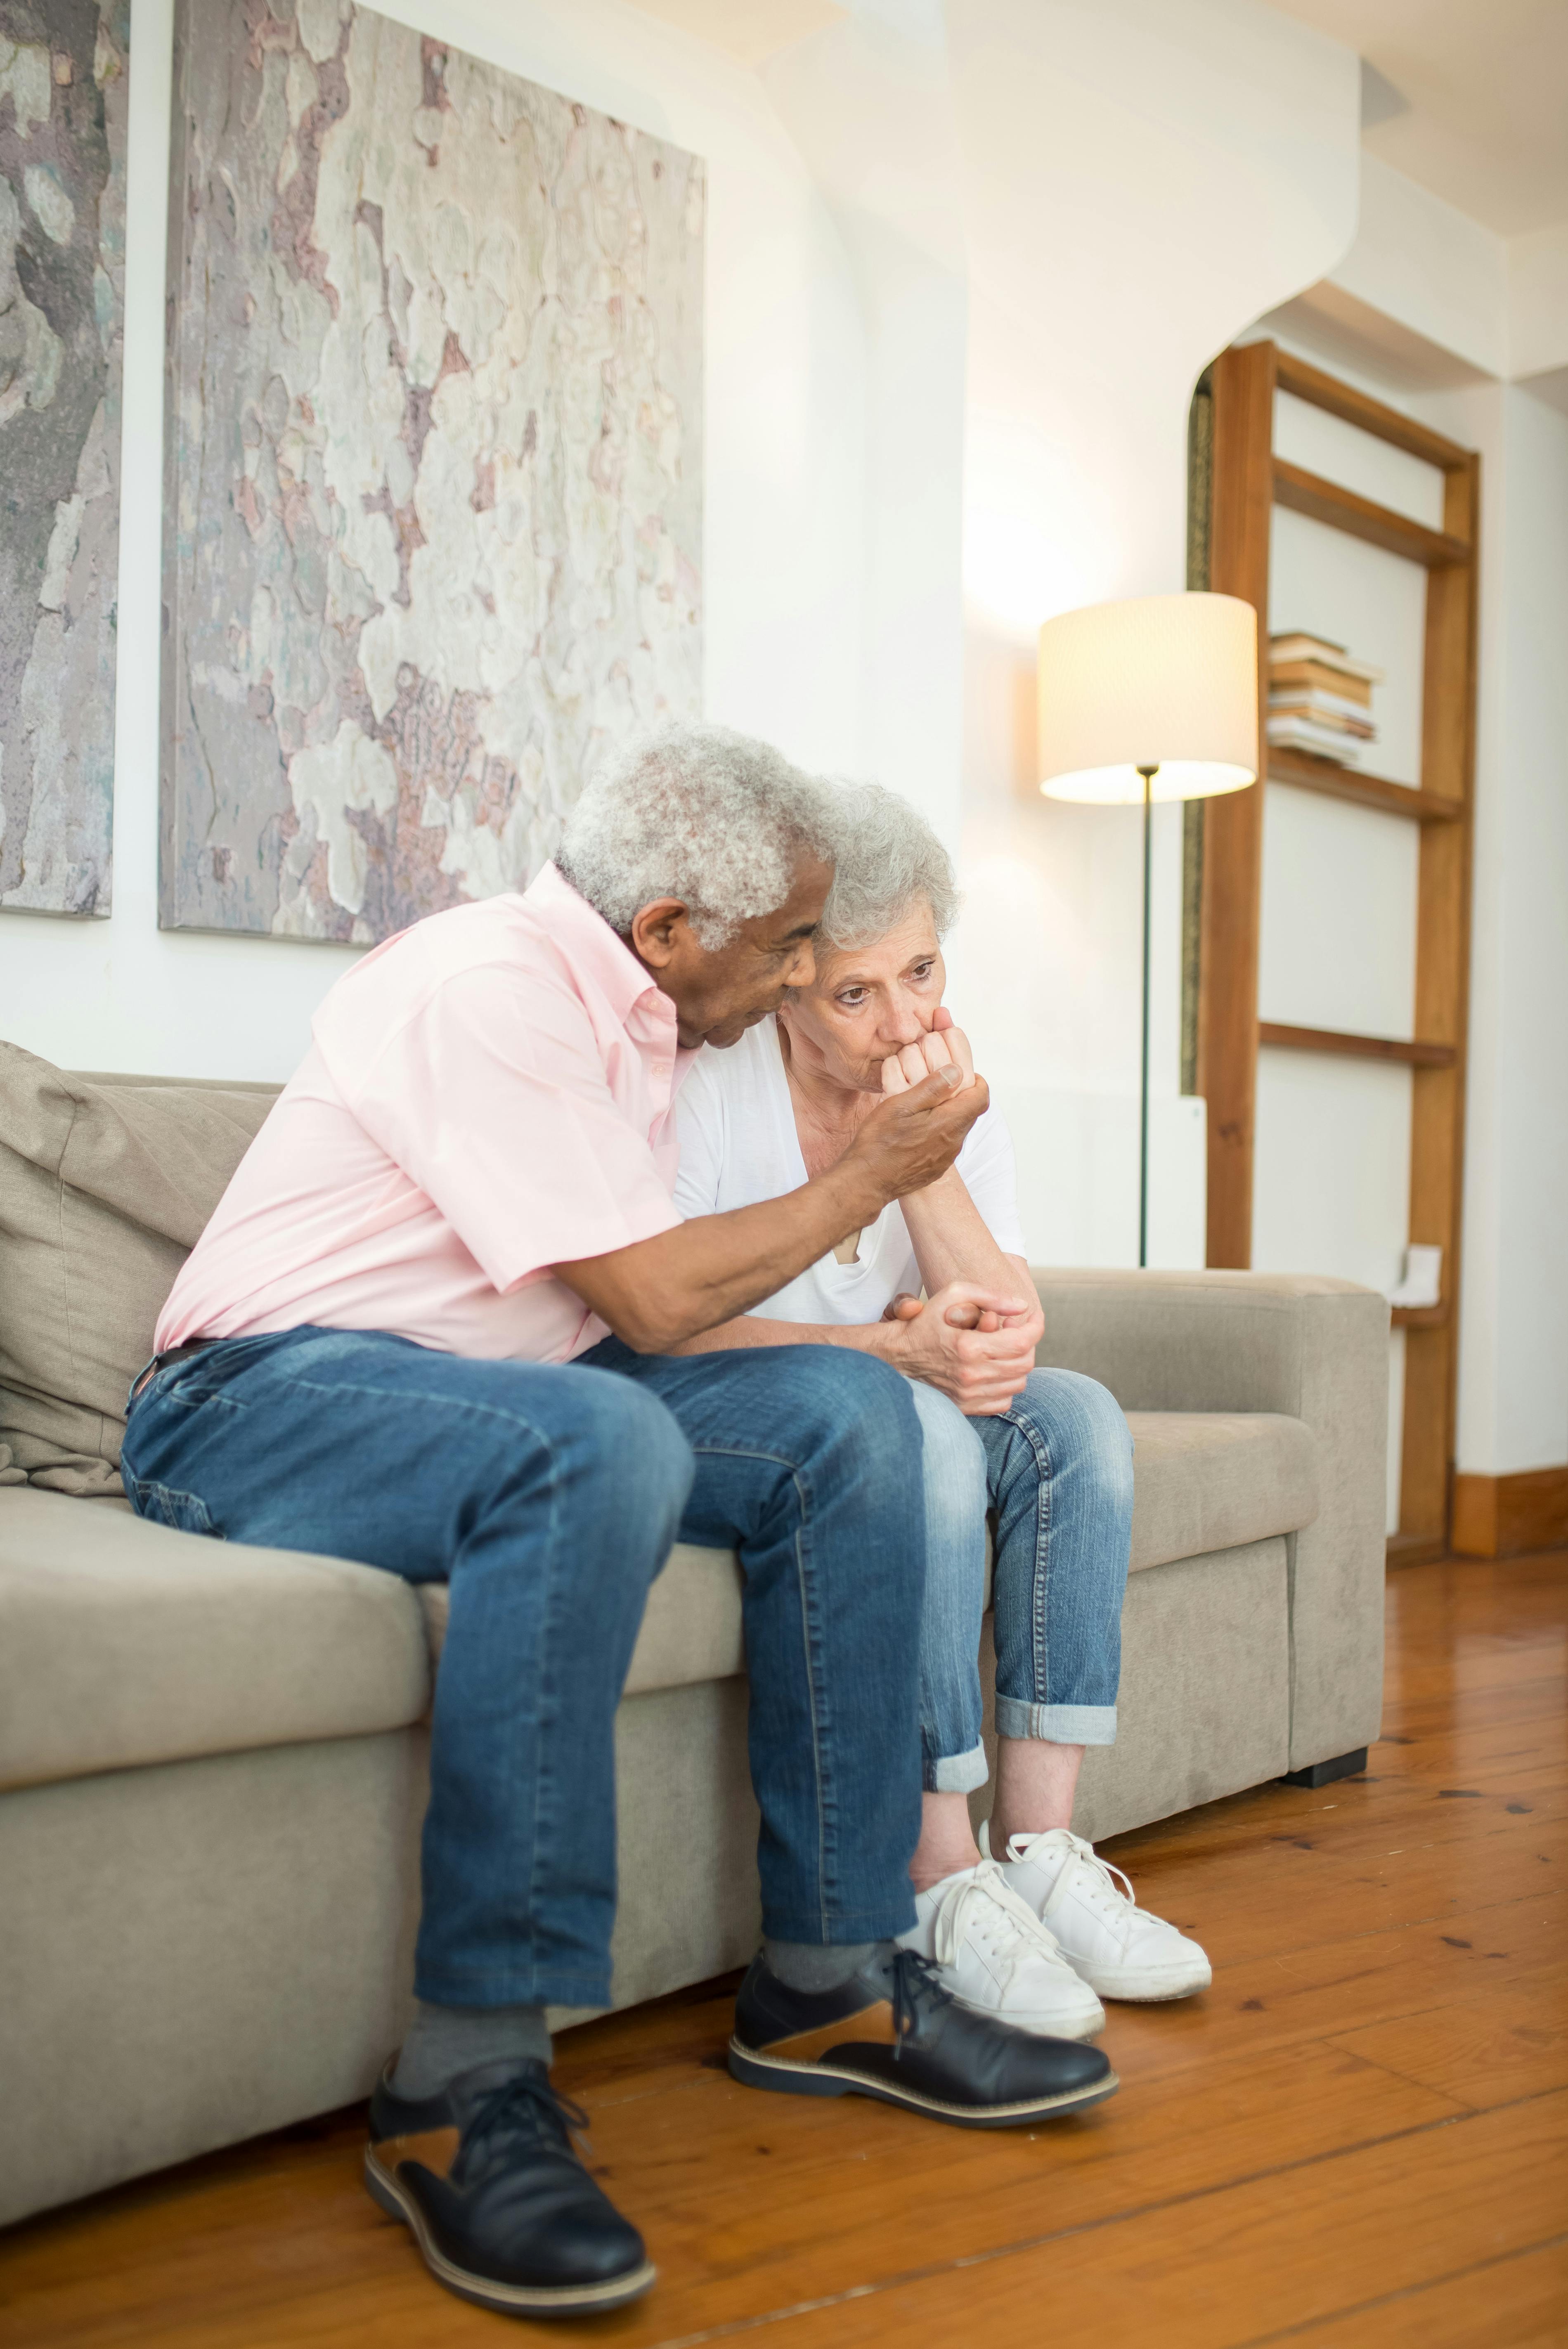 A sad older couple sitting on a couch | Source: Pexels